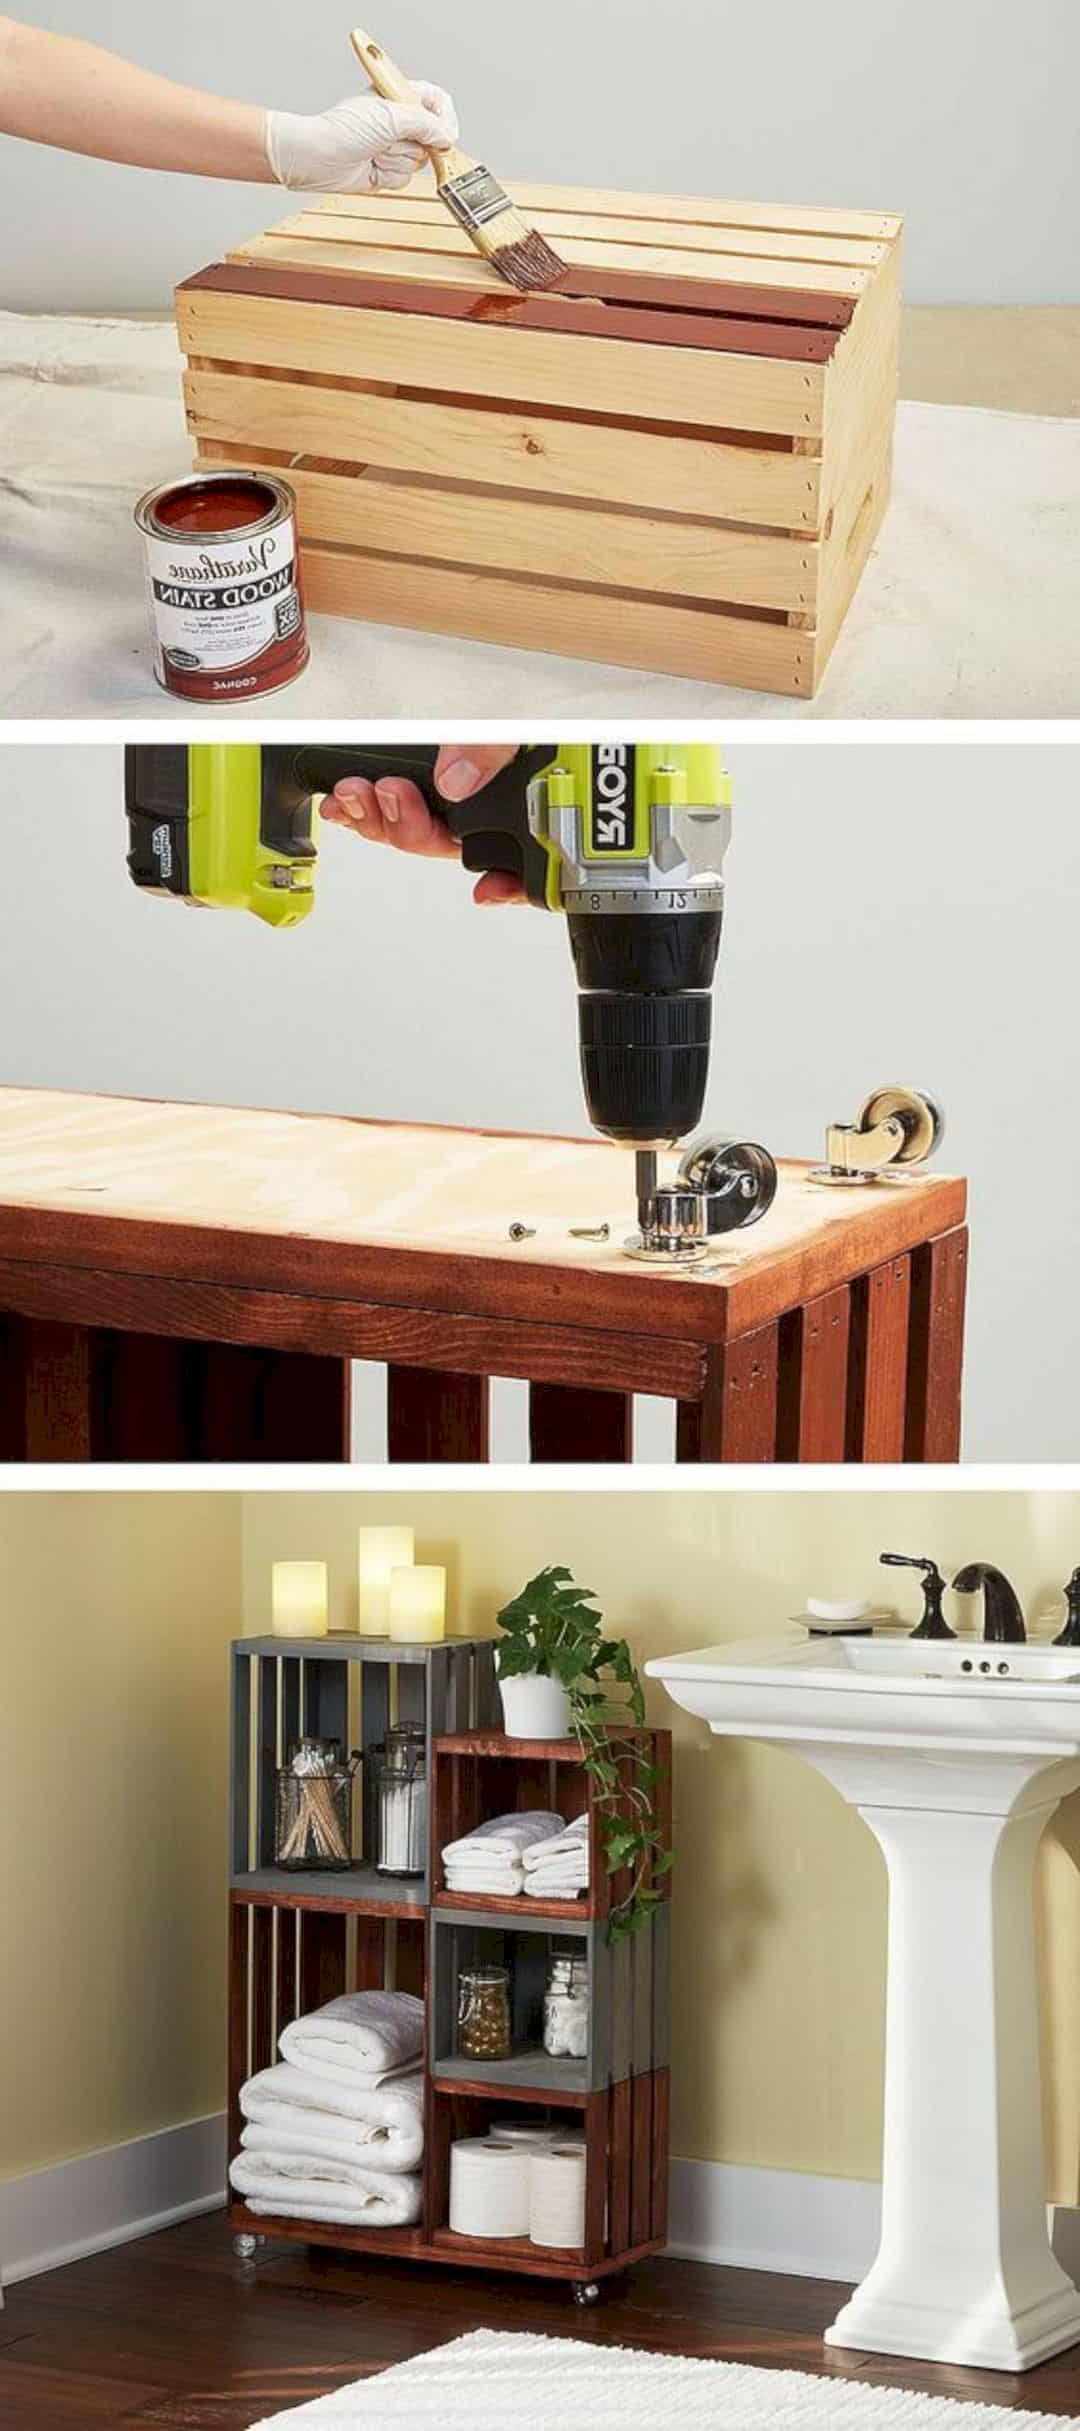 Be Creative With These 15 Diy Bathroom Storage Ideas To